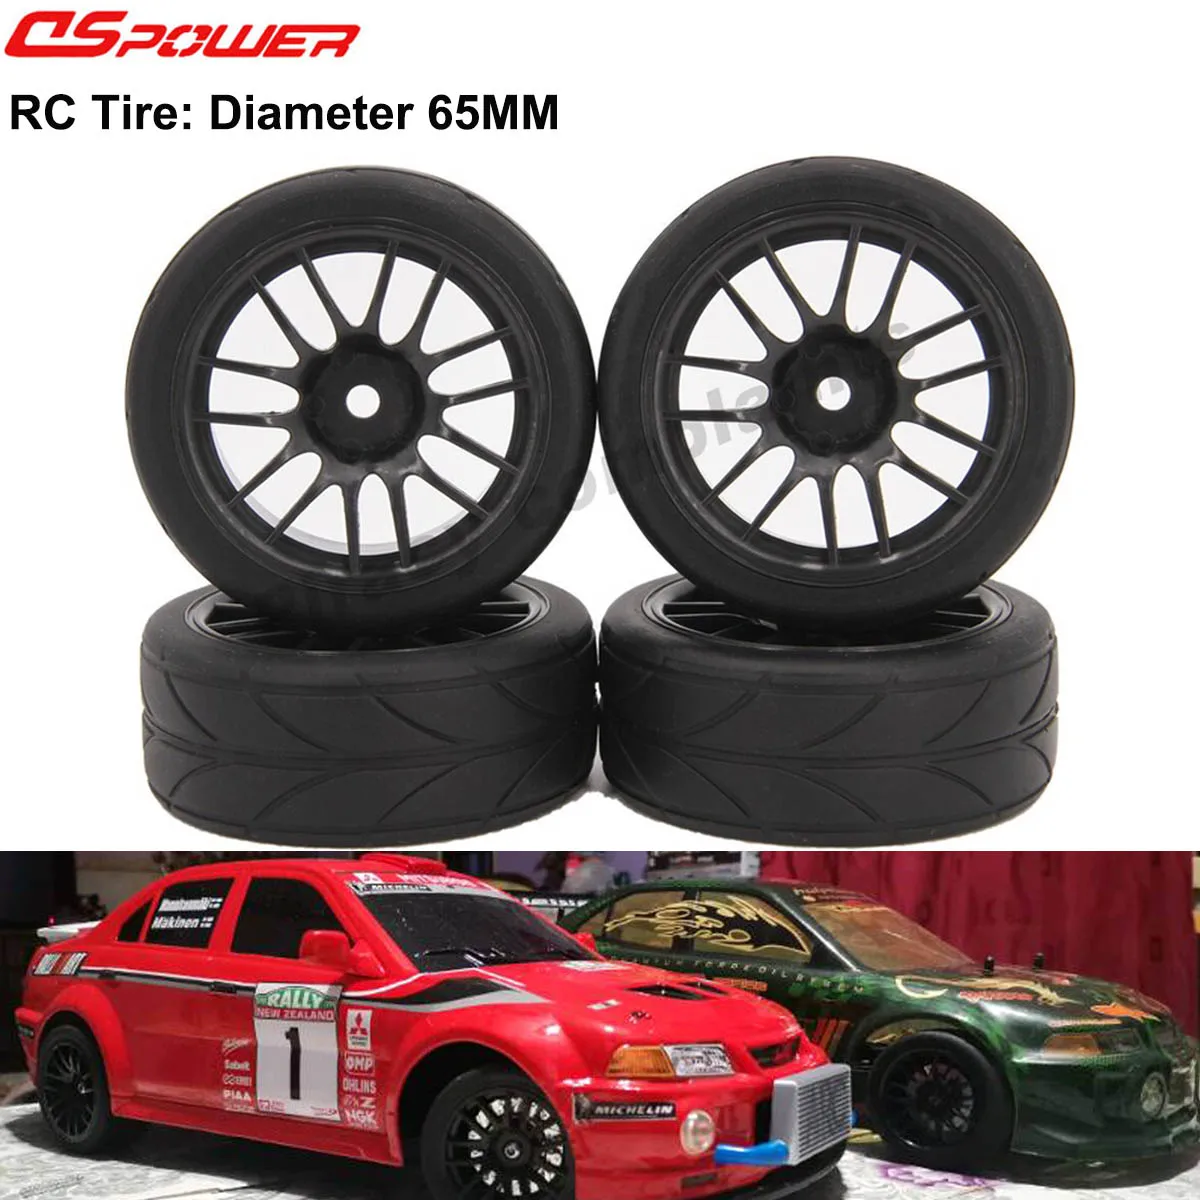 

4PCS 1.9 inch tires 65mm 1/10 On Road Tires & Wheels Rims 12mm Hex Hub for Tamiya Exceed RC Touring Car 144001 94123 94122 CS